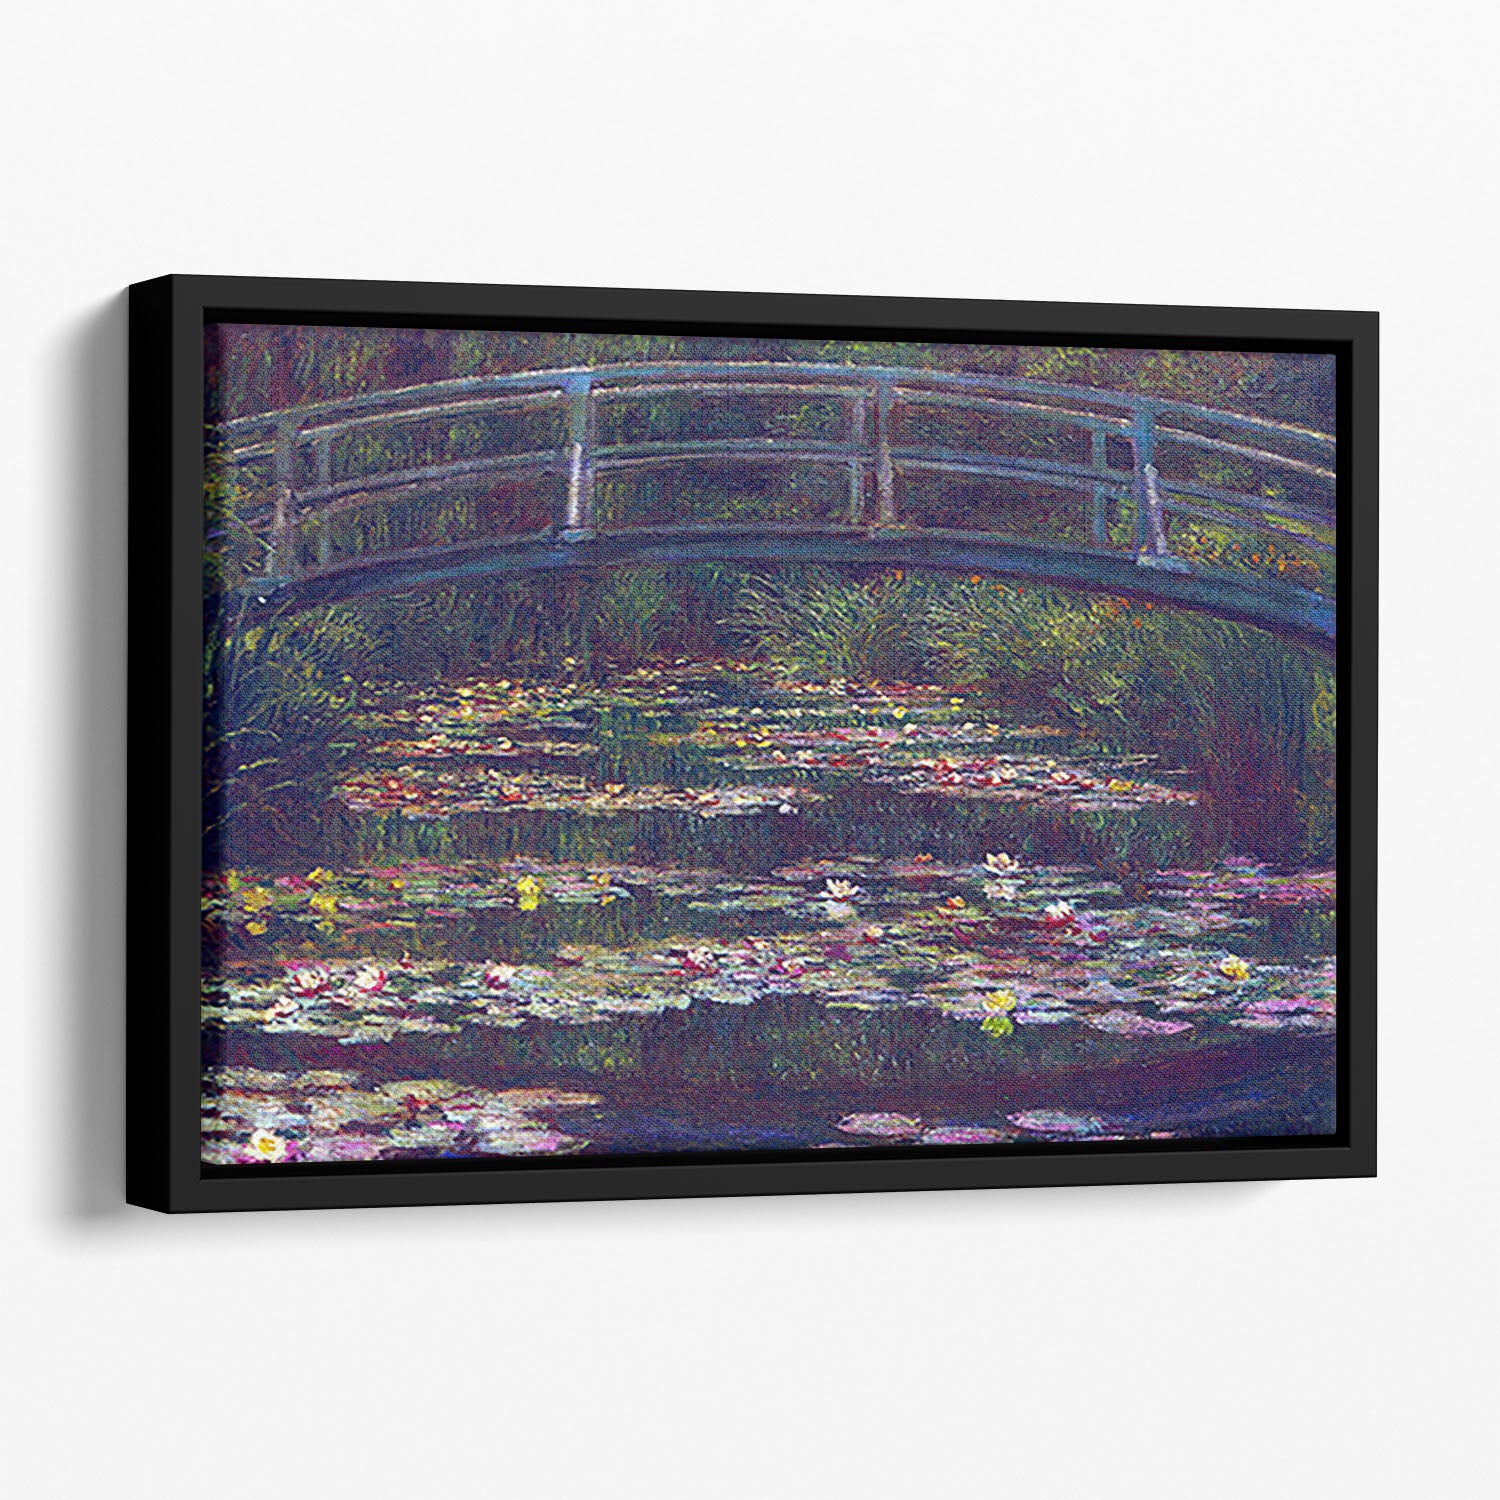 Water Lily Pond 5 by Monet Floating Framed Canvas